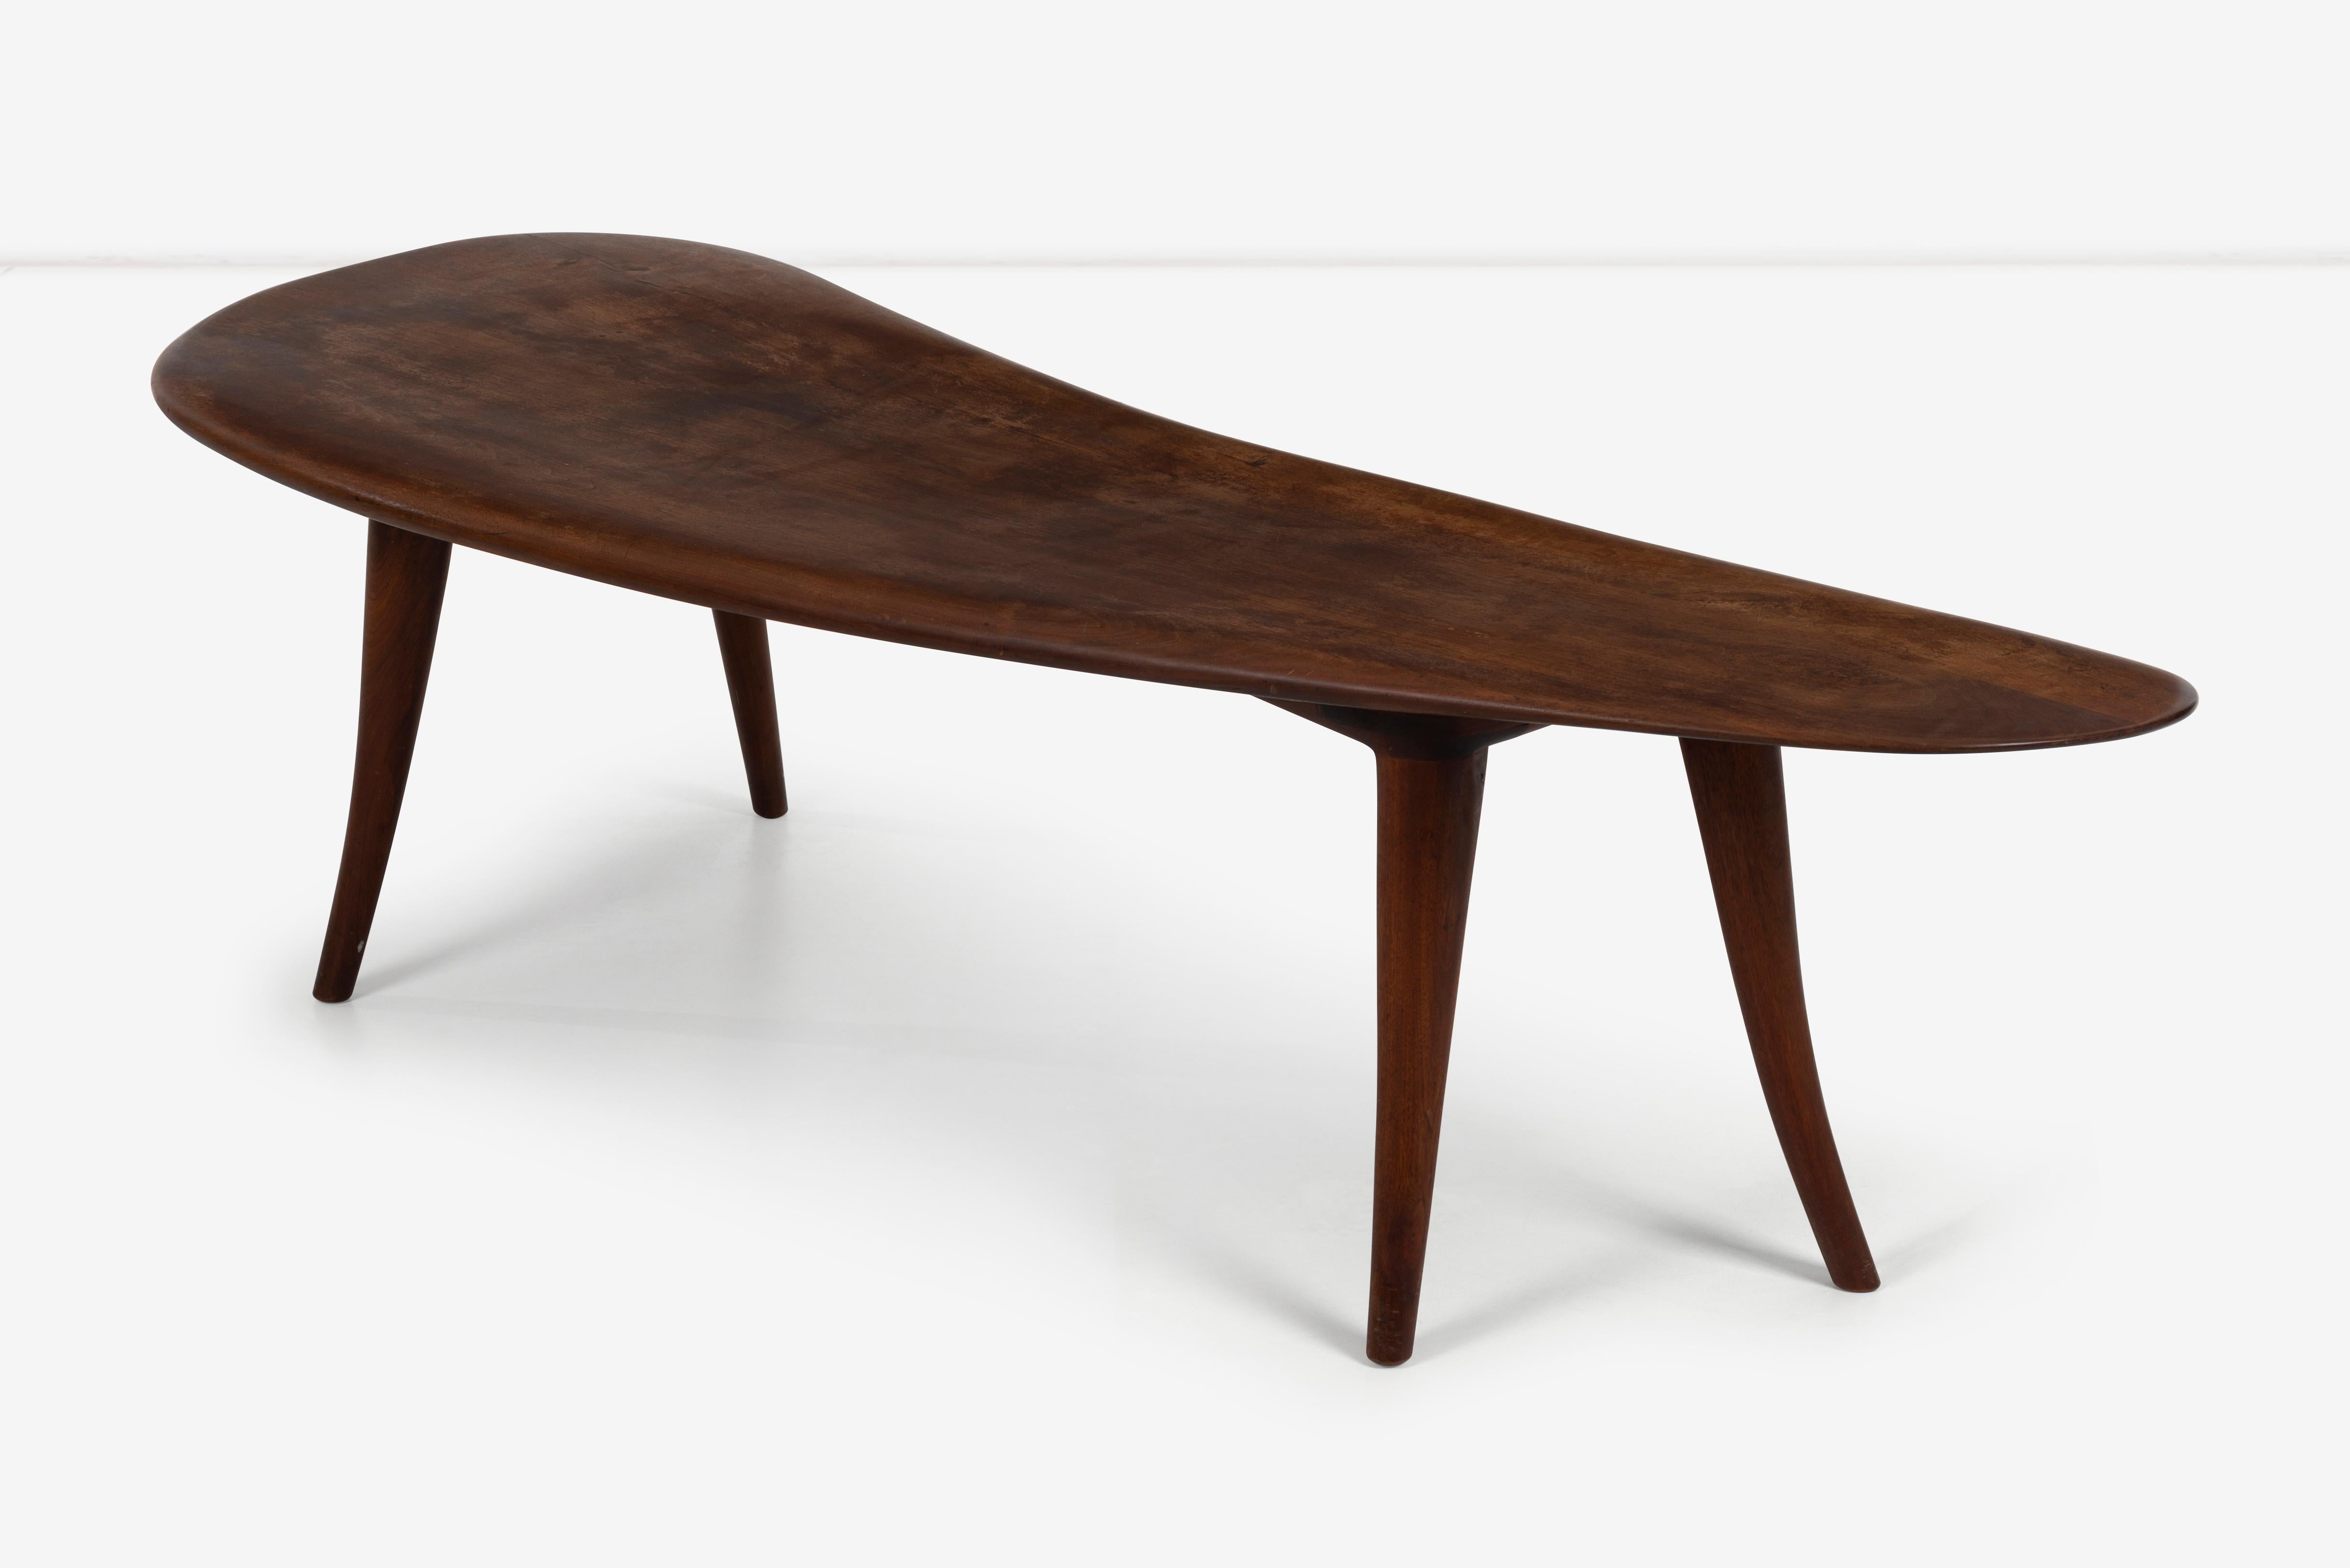 American Craftsman Wharton Esherick Large Sculpted Walnut Coffee Table For Sale